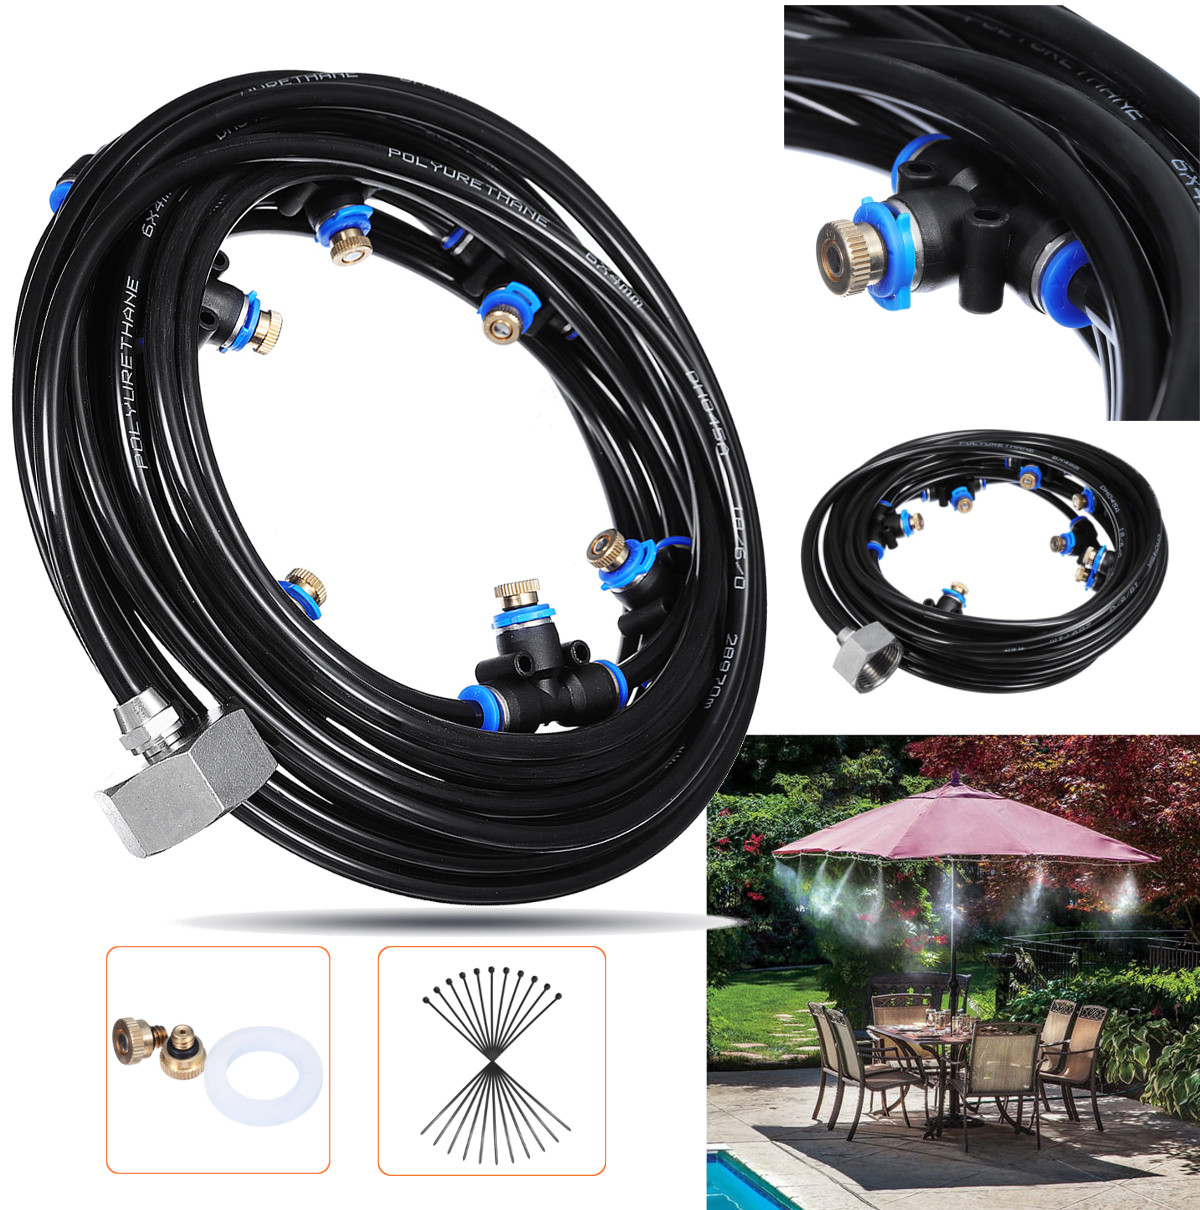 

10M+3M Outdoor Mist Coolant System Water Sprinkler Garden Patio Mister Cooling Spray Kits Micro Irrigation Set With 19 S